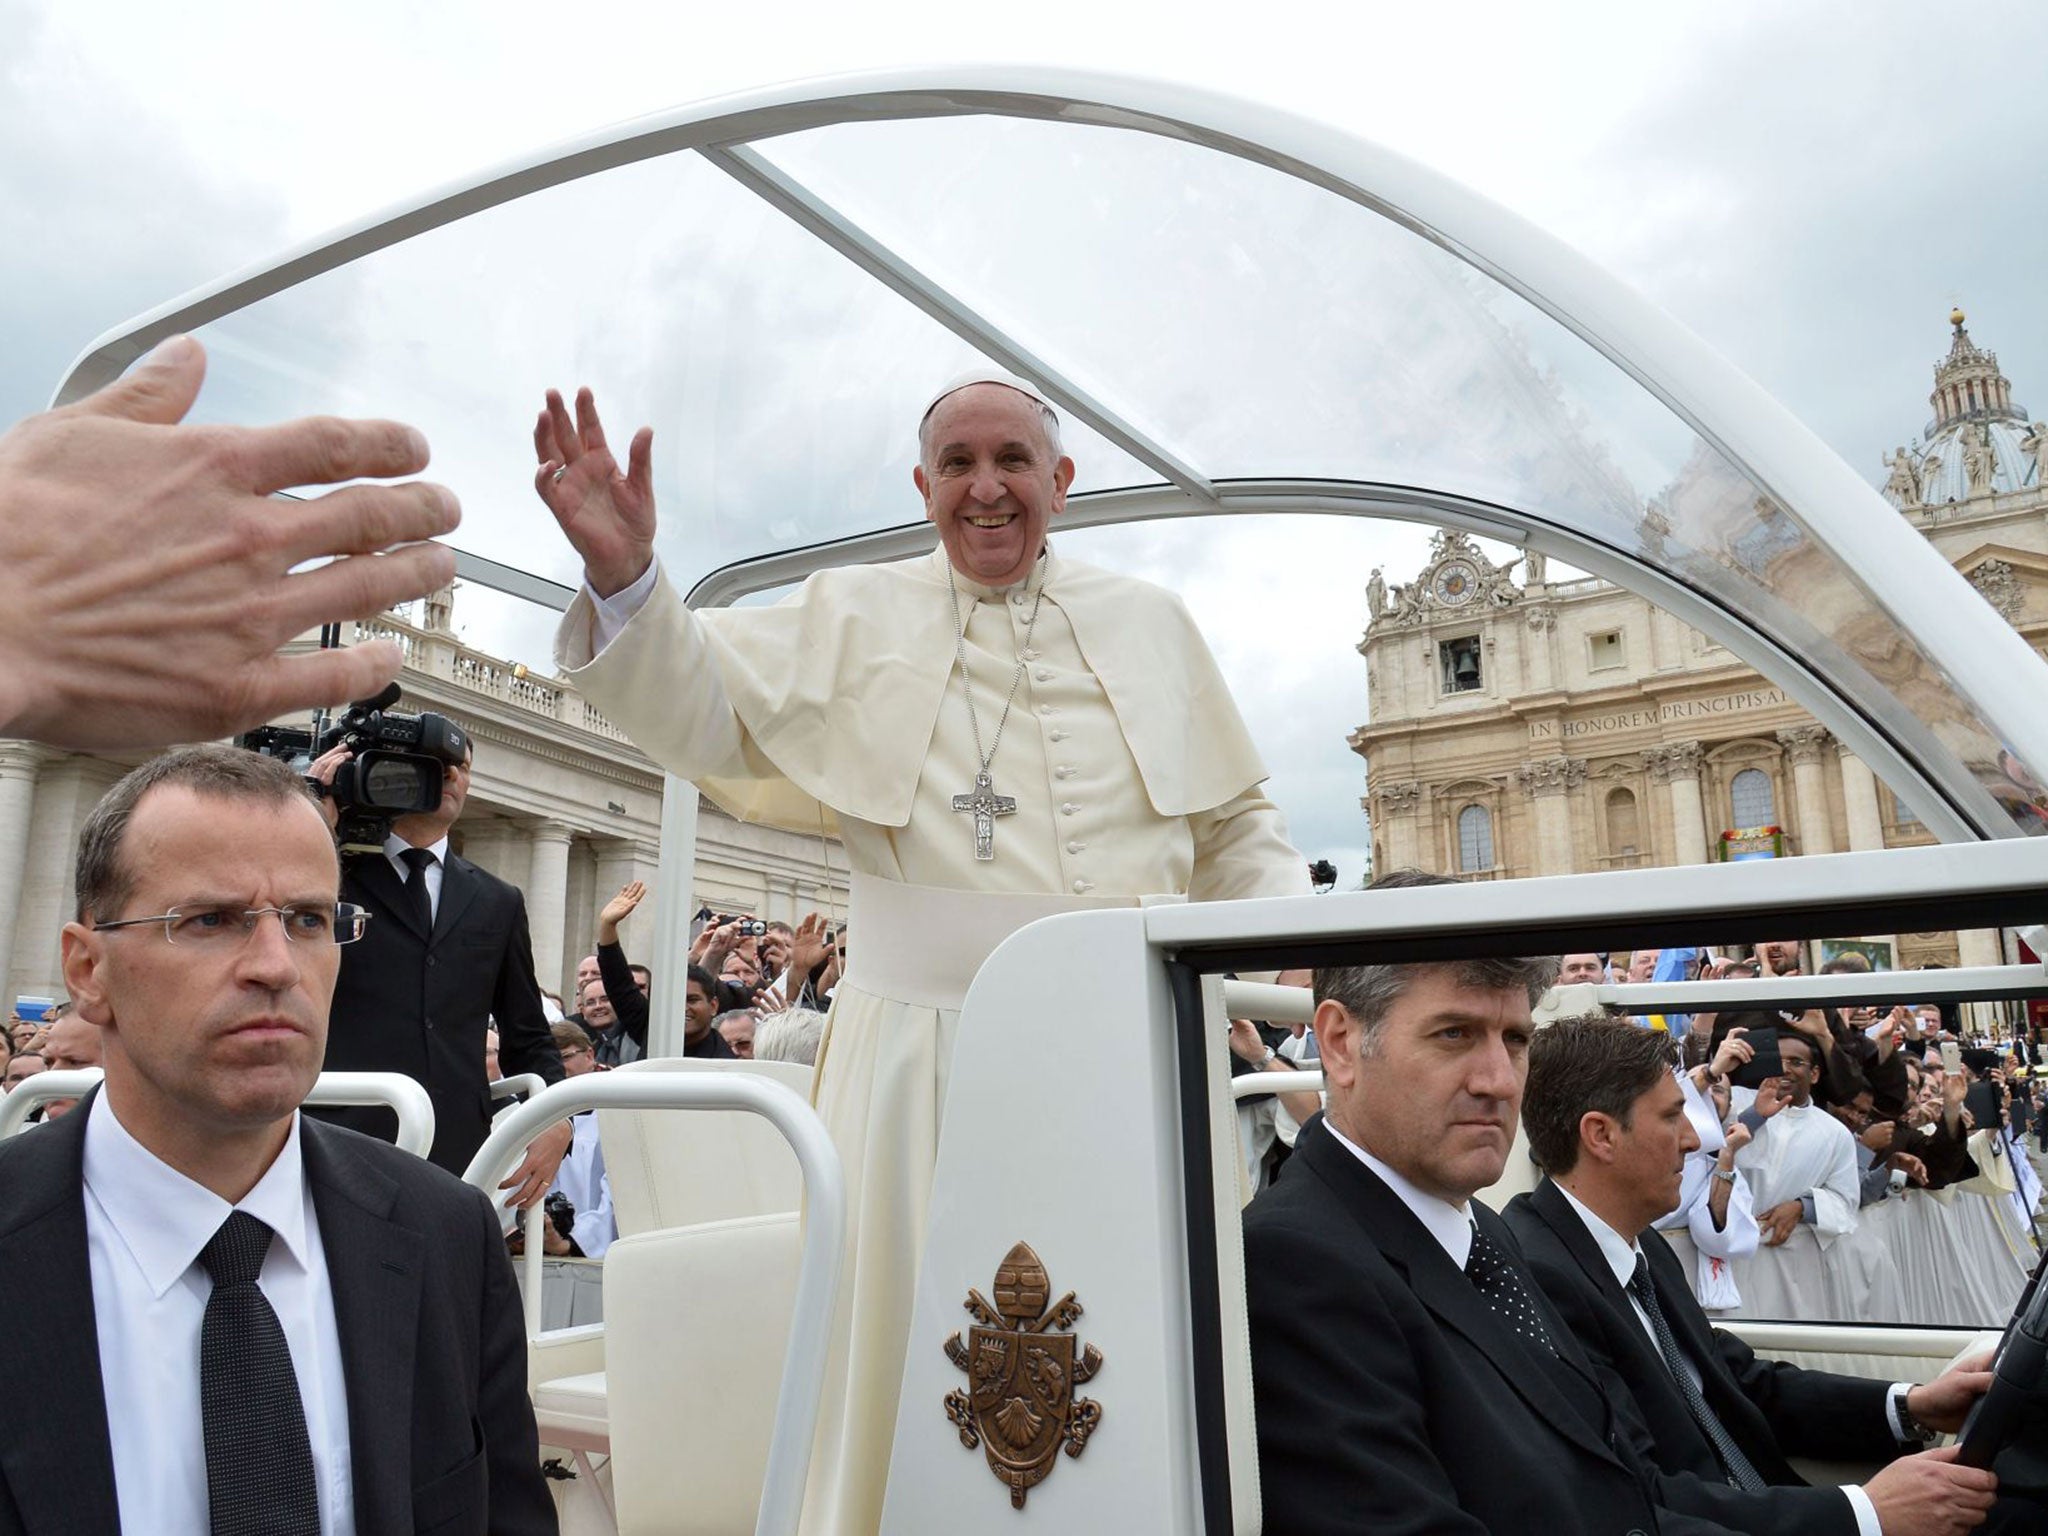 Pope Francis agreed to use the Popemobile in April in Rome